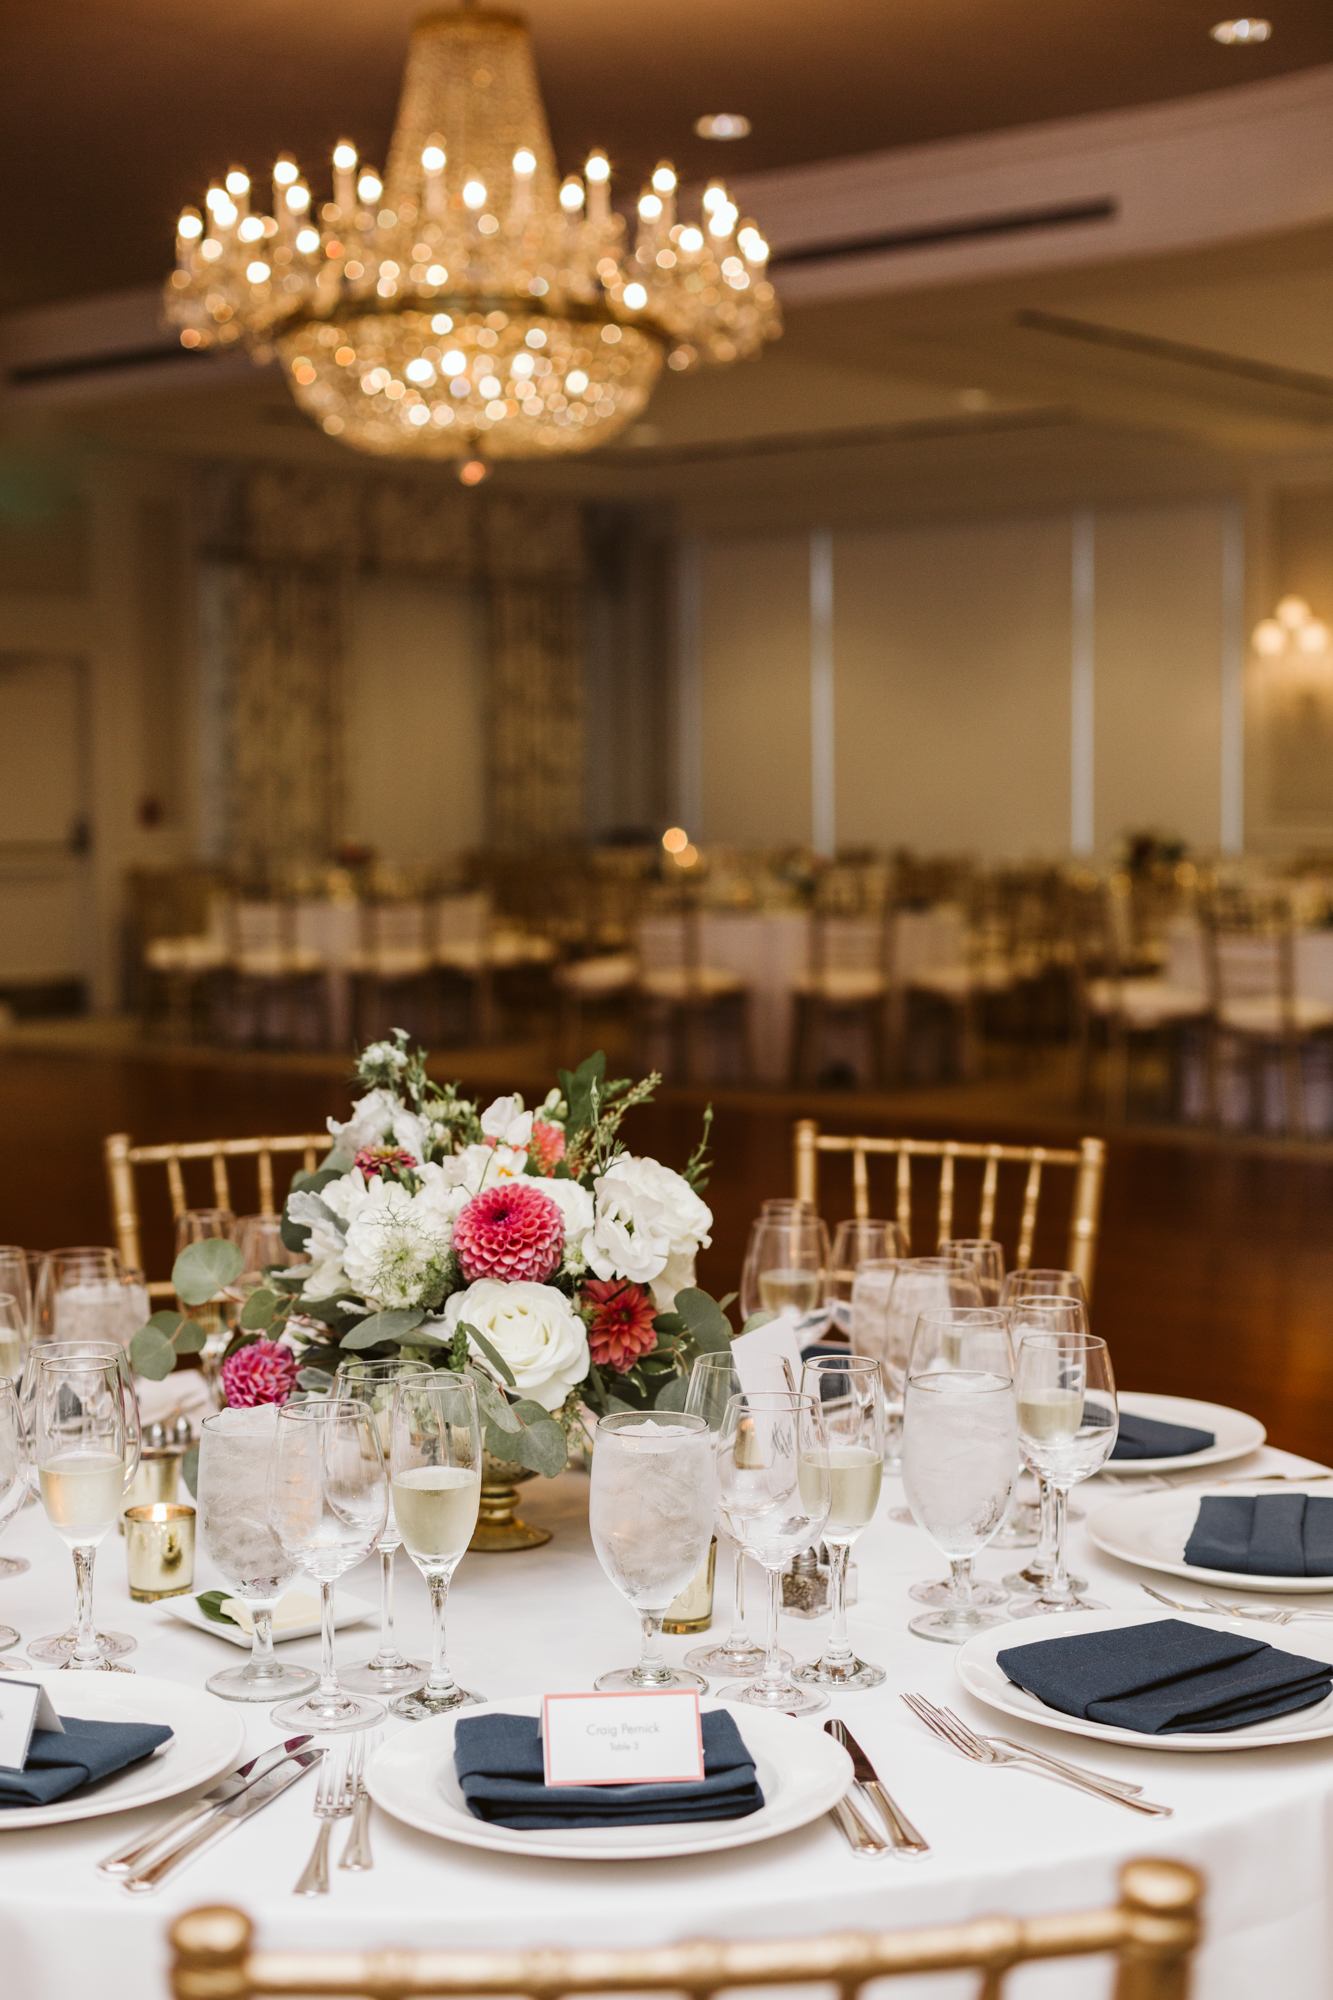 Elegant, Columbia Country Club, Chevy Chase Maryland, Baltimore Wedding Photographer, Classic, Traditional, Wedding Reception Centerpieces, 